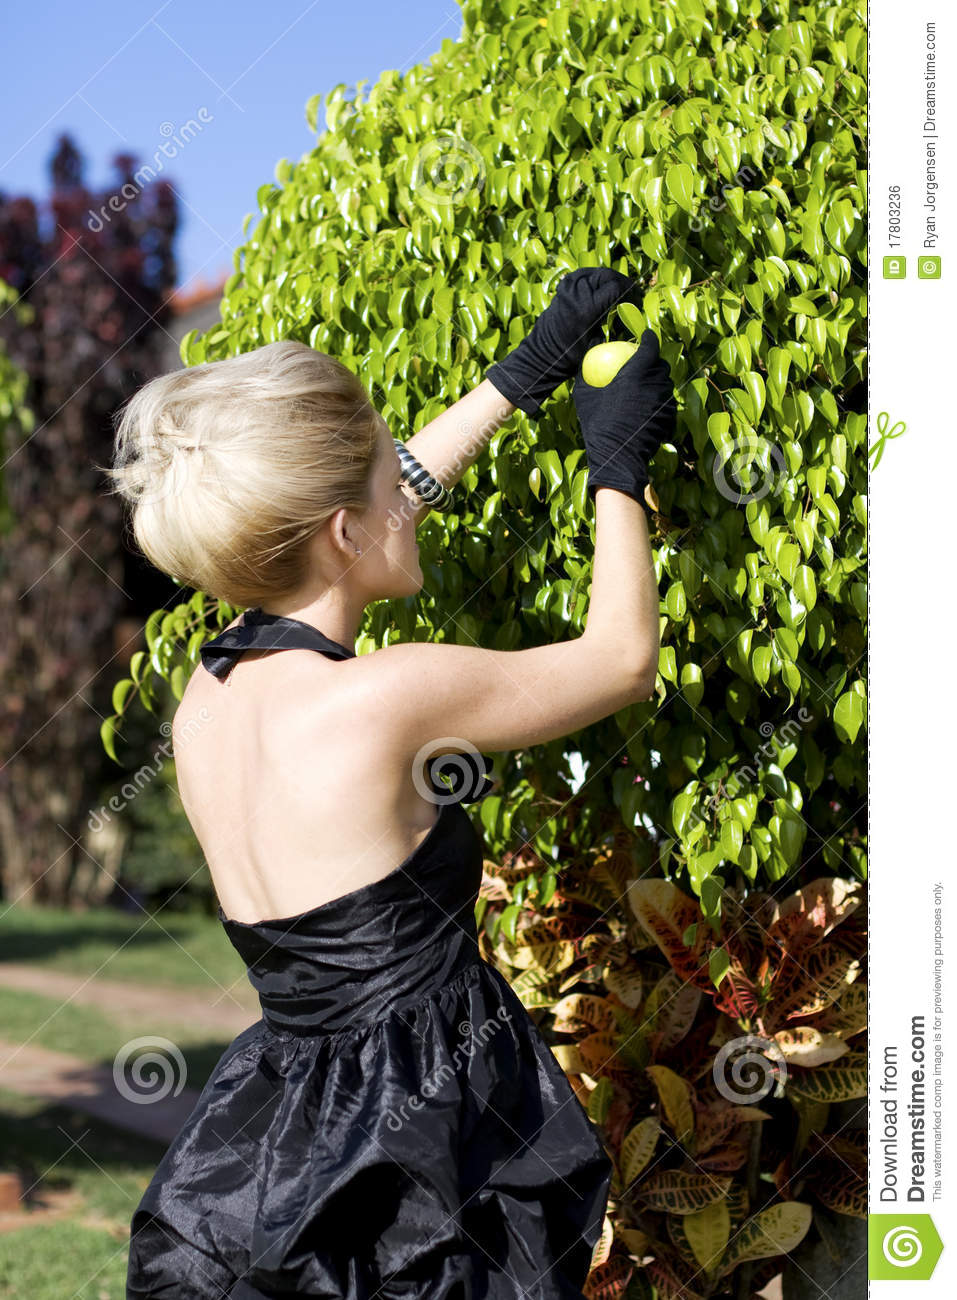 Rear Side View Of Young Woman In Formal Dress Picking Fruit From Leafy